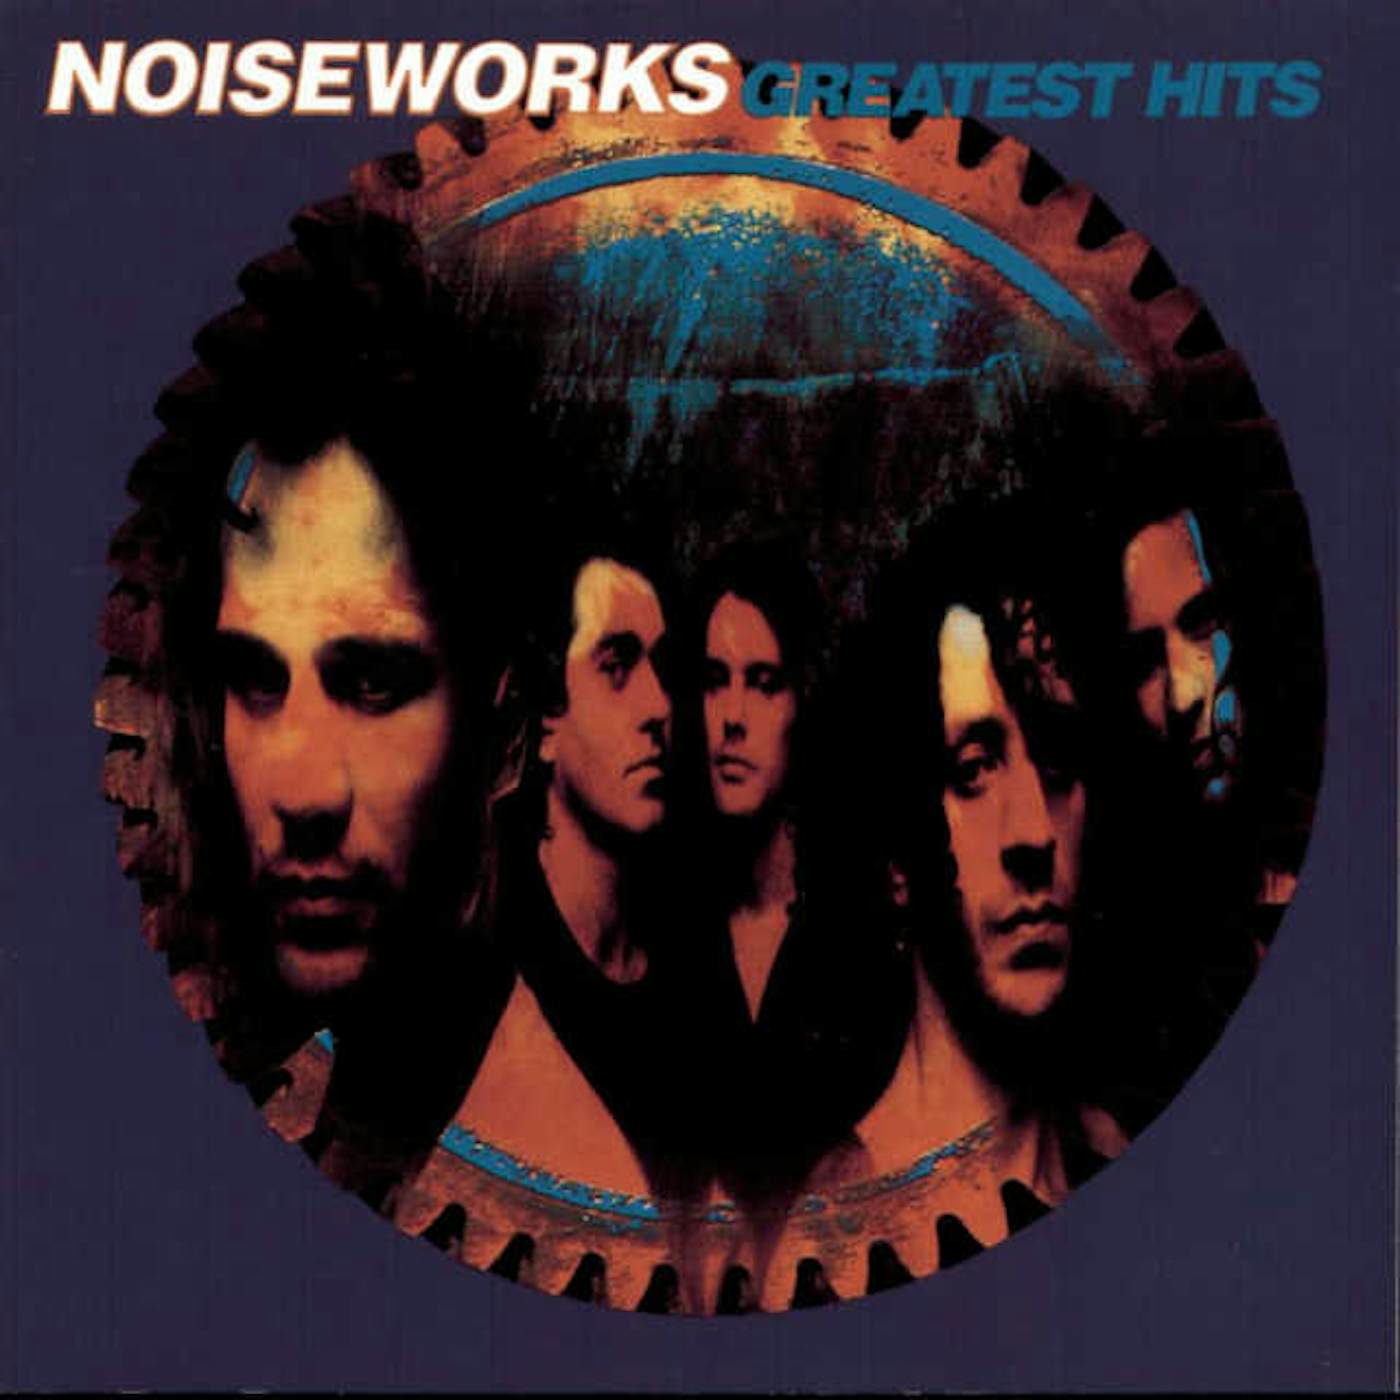 Noiseworks GREATEST HITS CD